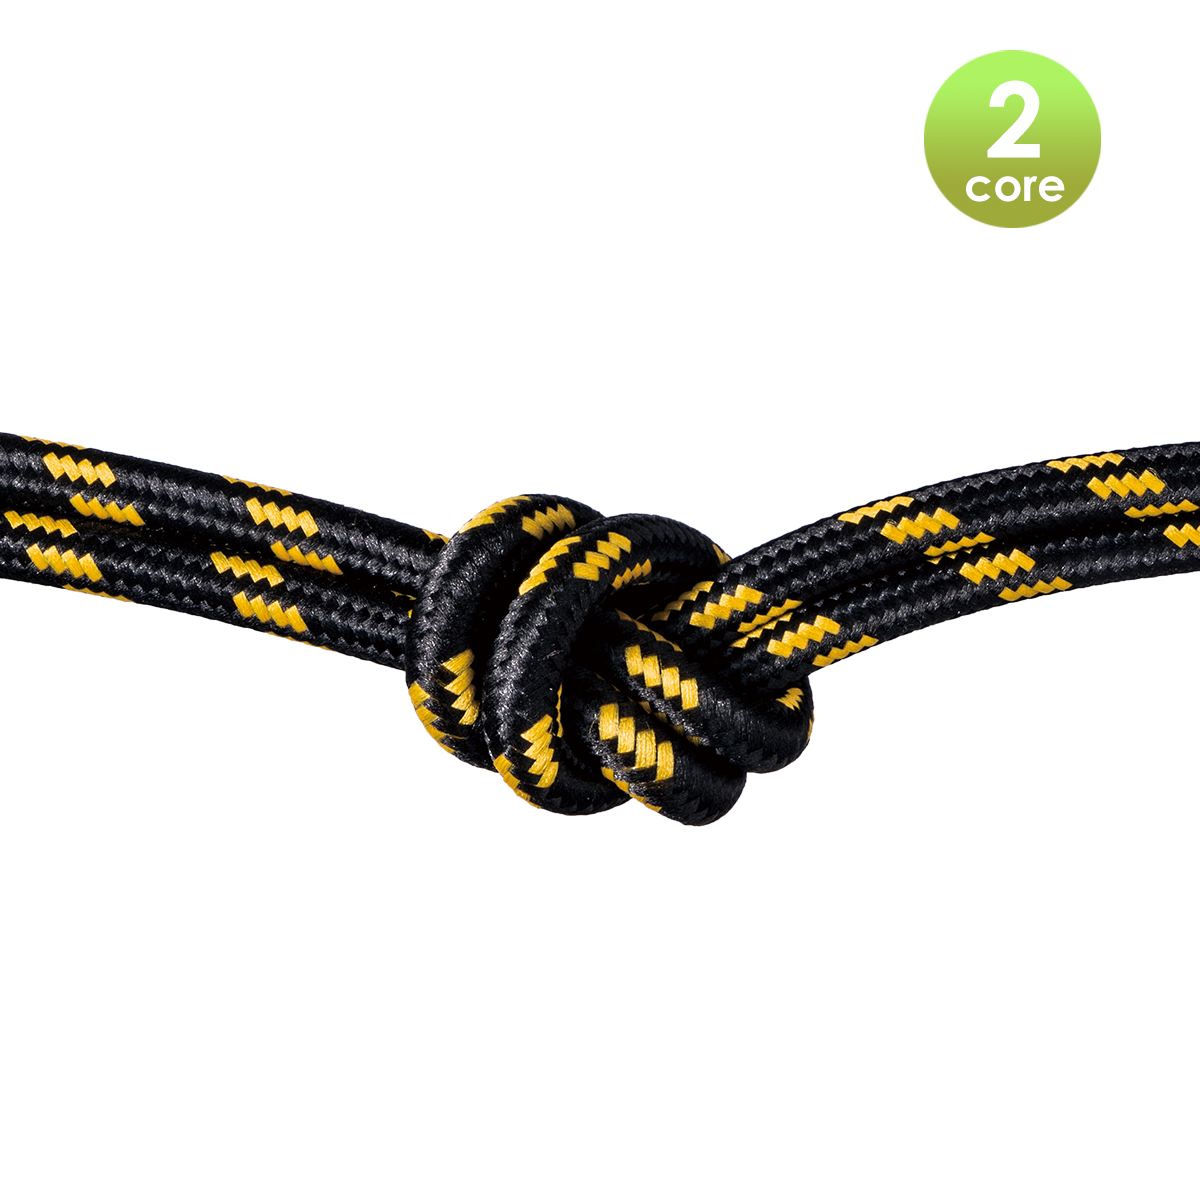 Tangla lighting - TLCB03005C - Fabric cable 2 core - in black and yellow